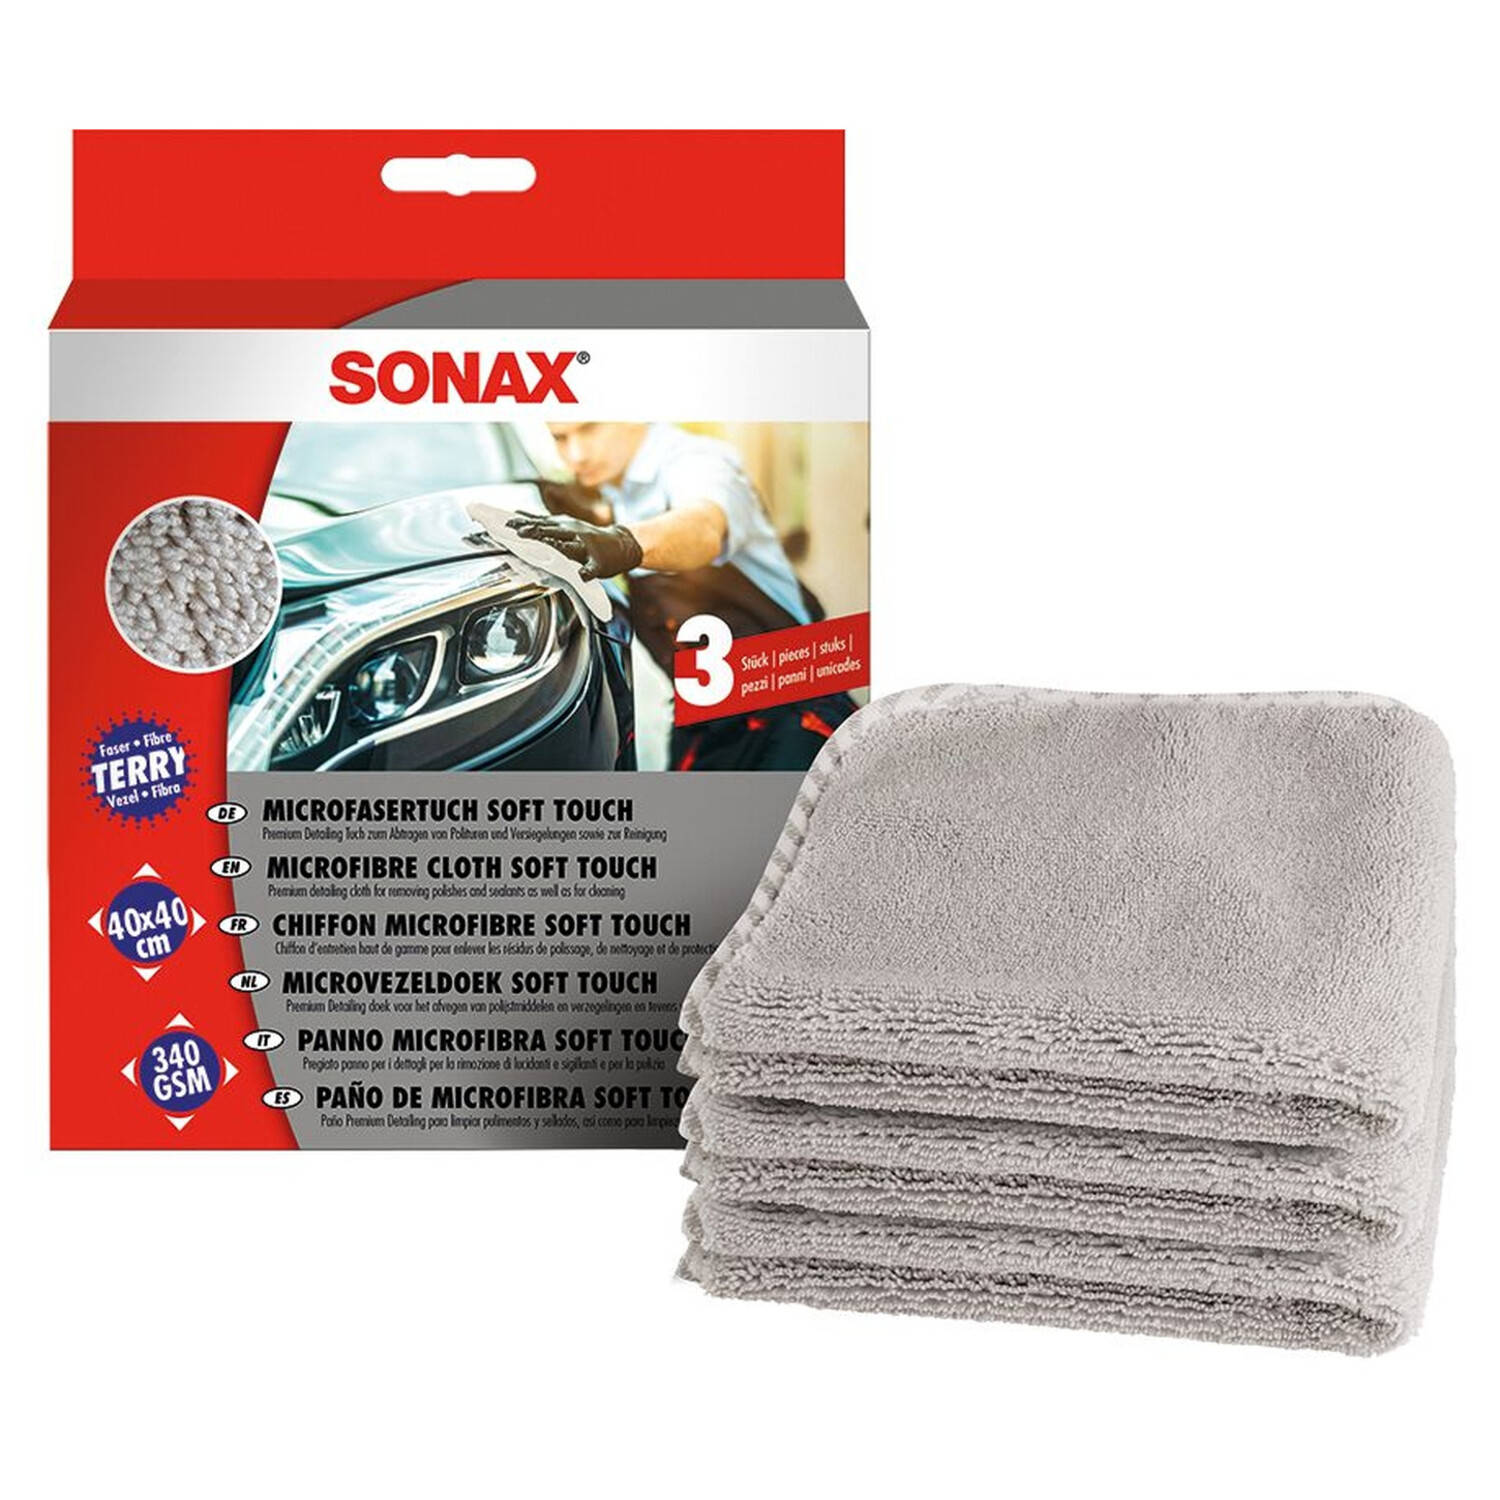 SONAX Microfasertuch Soft Touch, 40 × 40 cm, 3er Pack - Car Care King